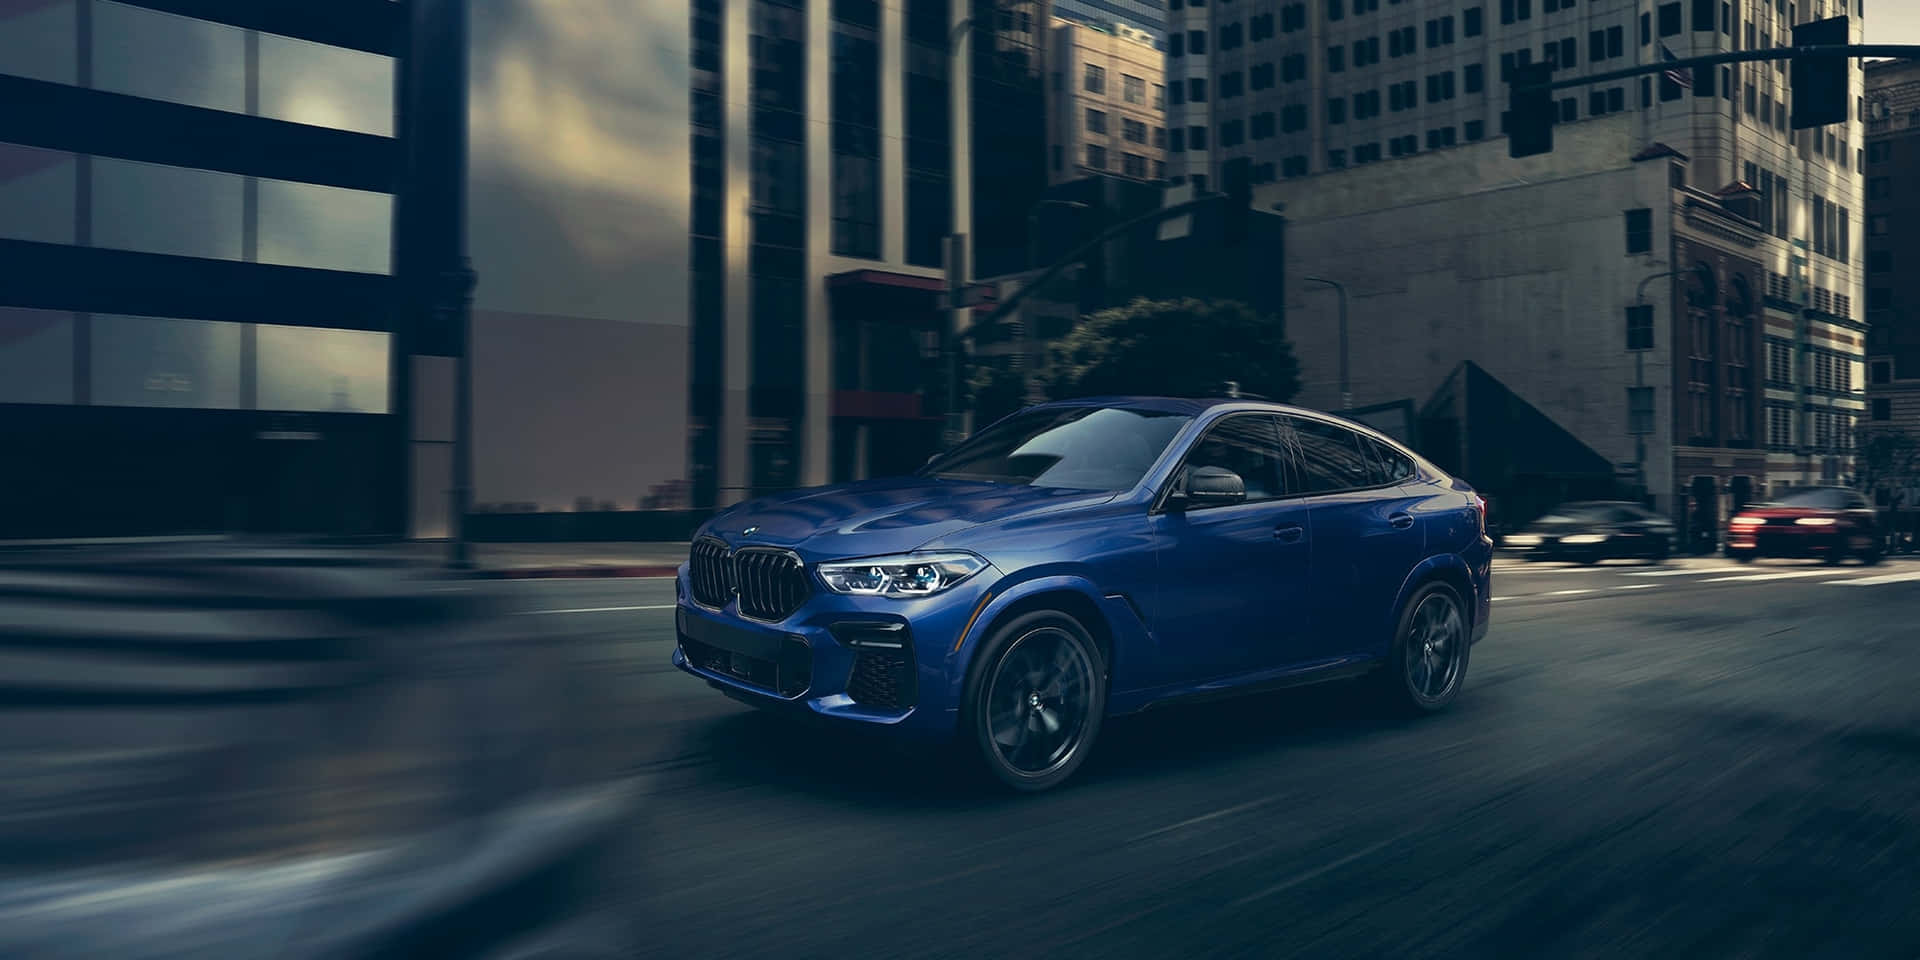 The All-New BMW X6 M